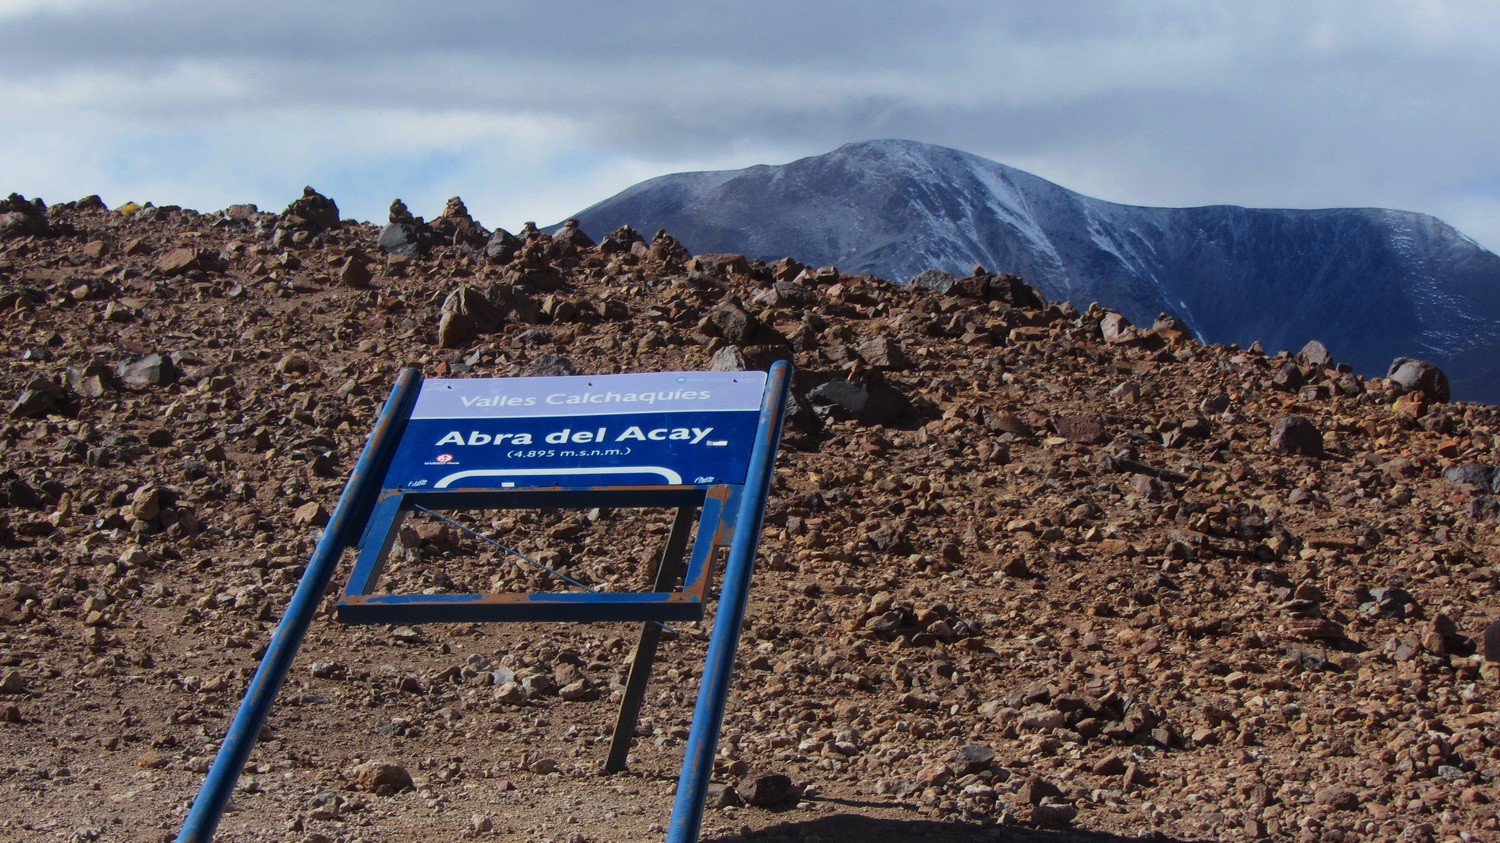 The highest point of the more than 5000 km long Ruta 40: Abra del Acay with 4895 meters sea-level